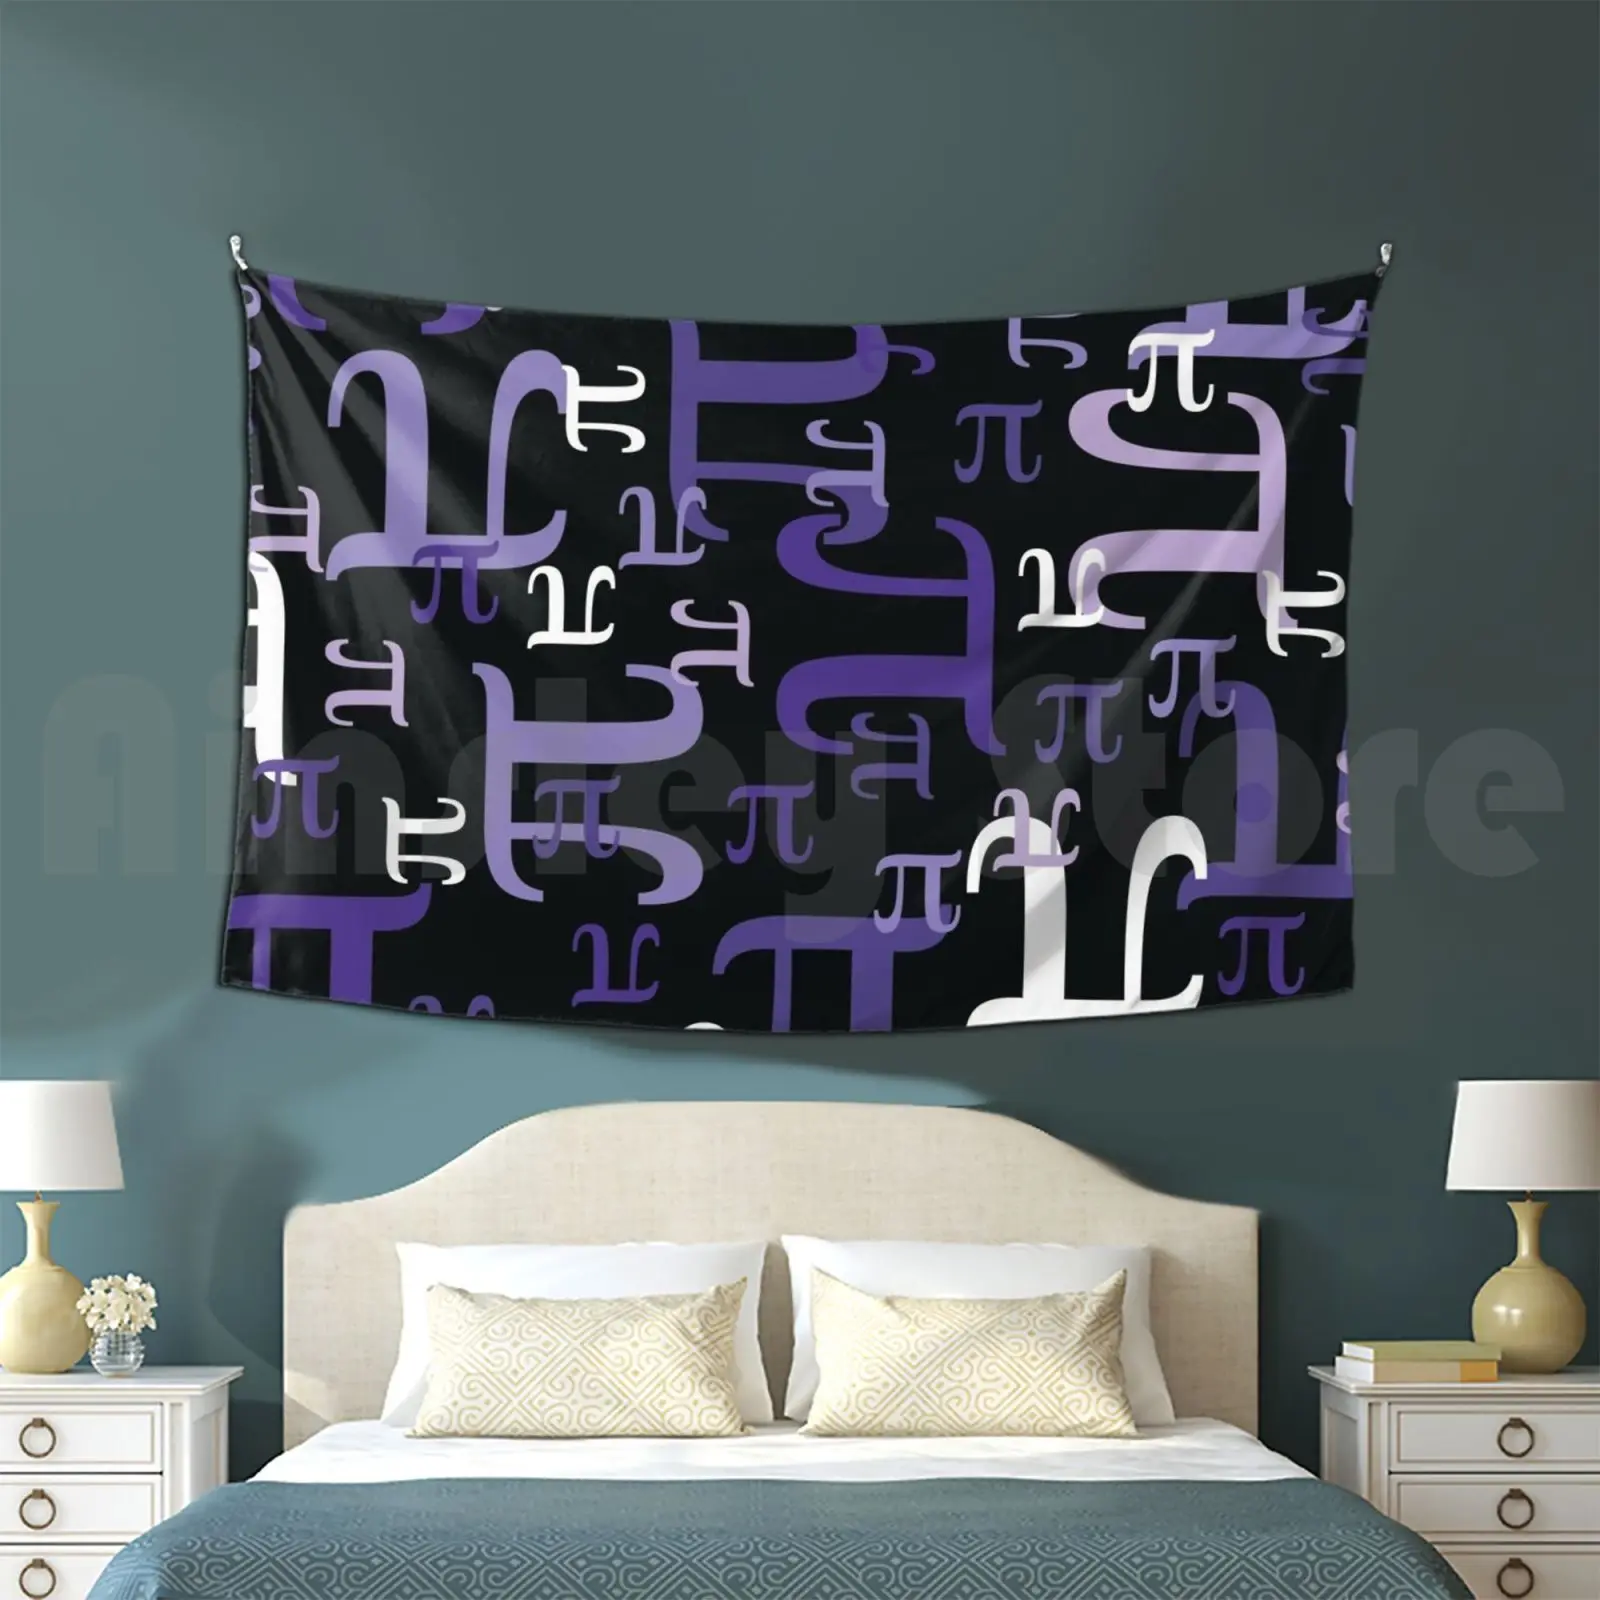 

Pieces Of Pi ( Purple ) Tapestry Living Room Bedroom 2847 Pi Math Pi Day Nerd Geek Nerdy Geeky Science Pretty Cool